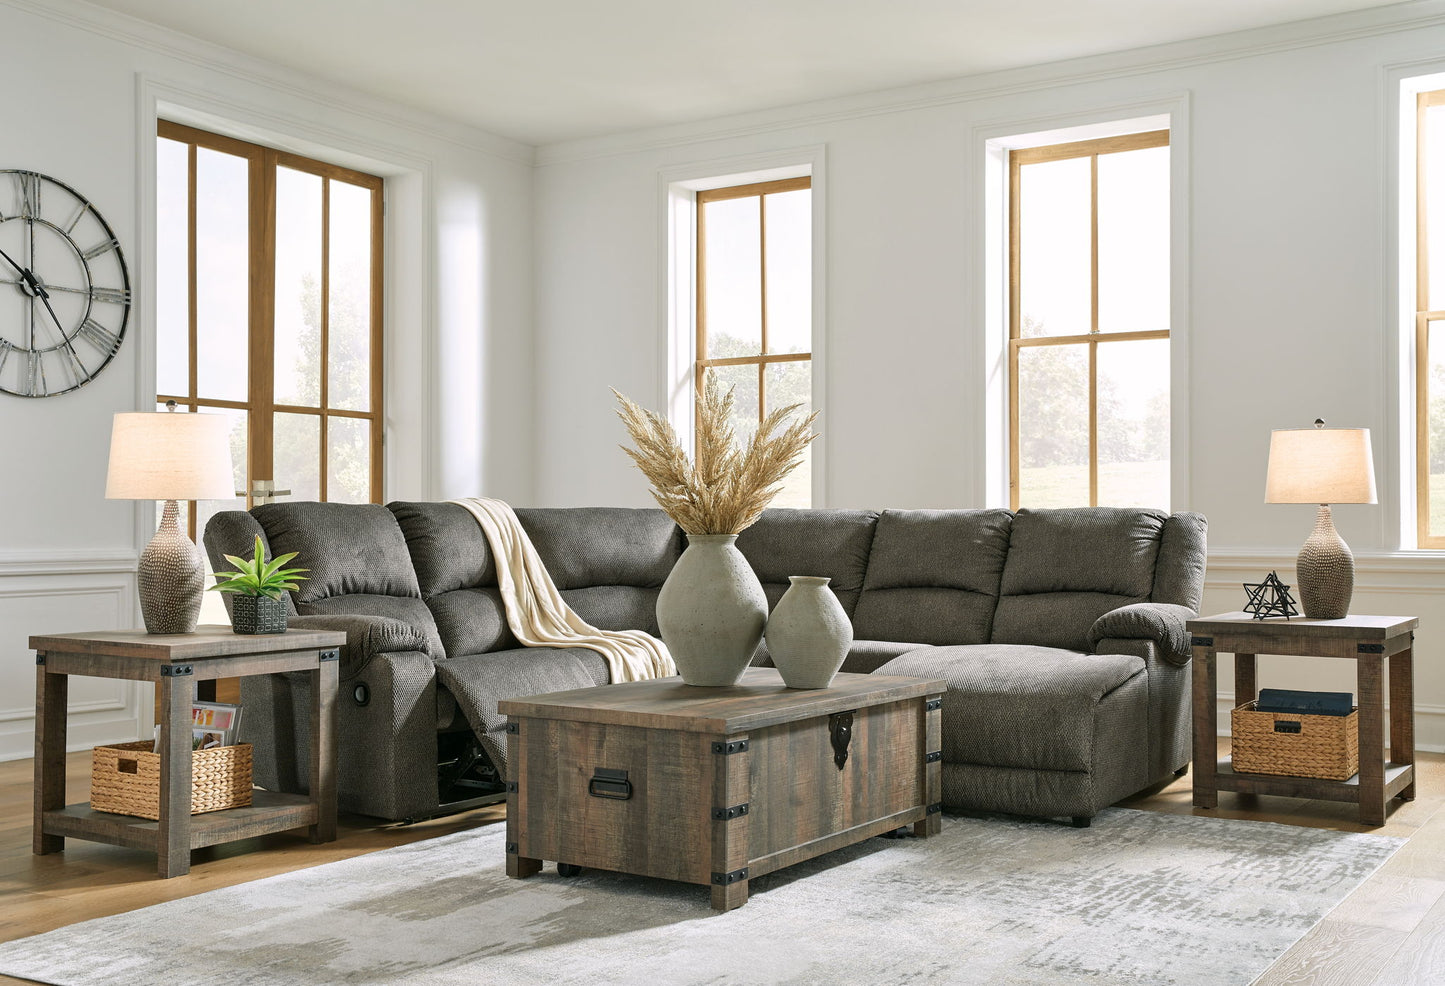 Benlocke - Flannel - Right Arm Facing Corner Chaise 5 Pc Sectional